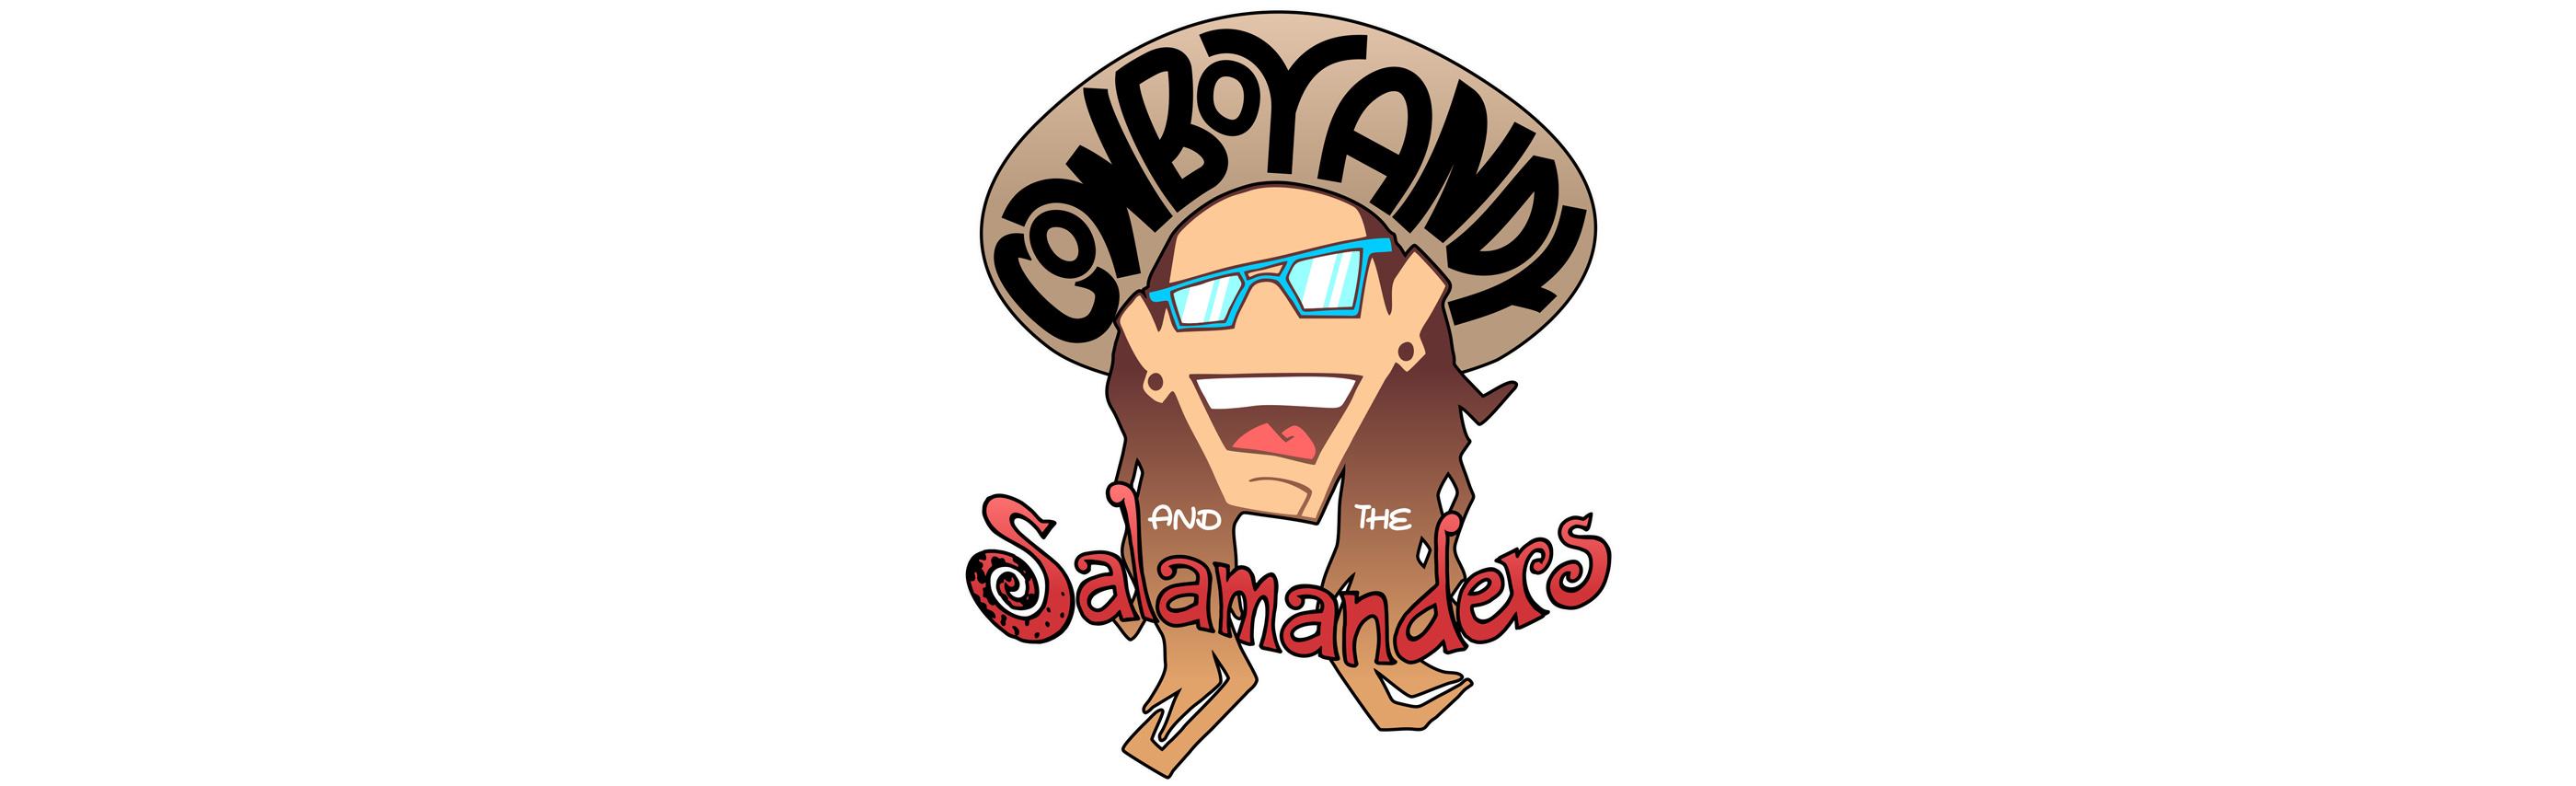 CANCELLED: Cowboy Andy and The Salamanders